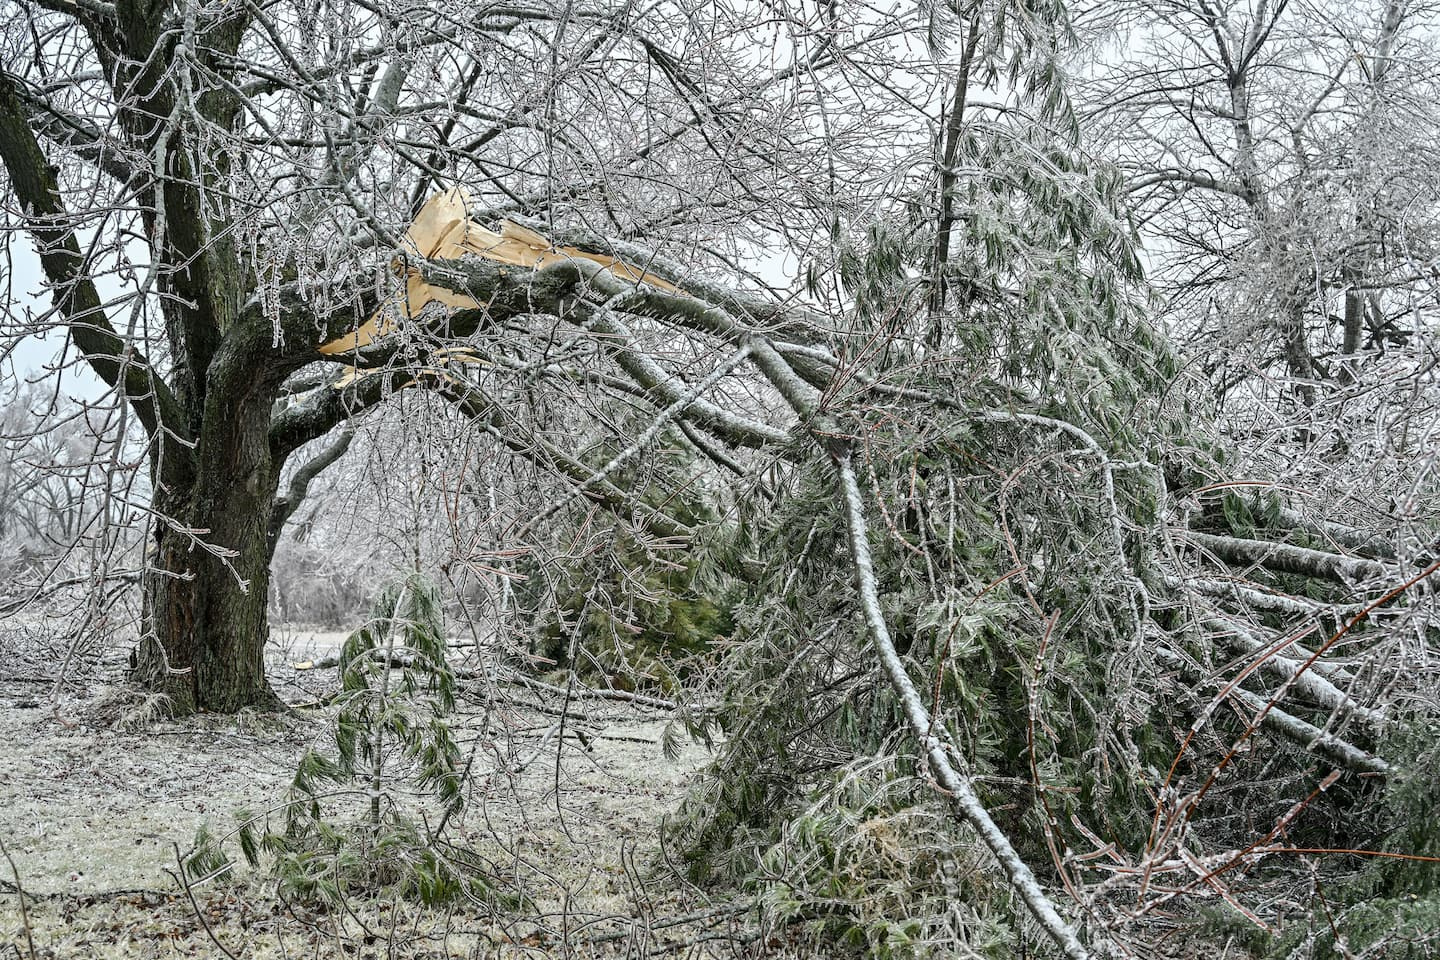 A reminder of the ice storm